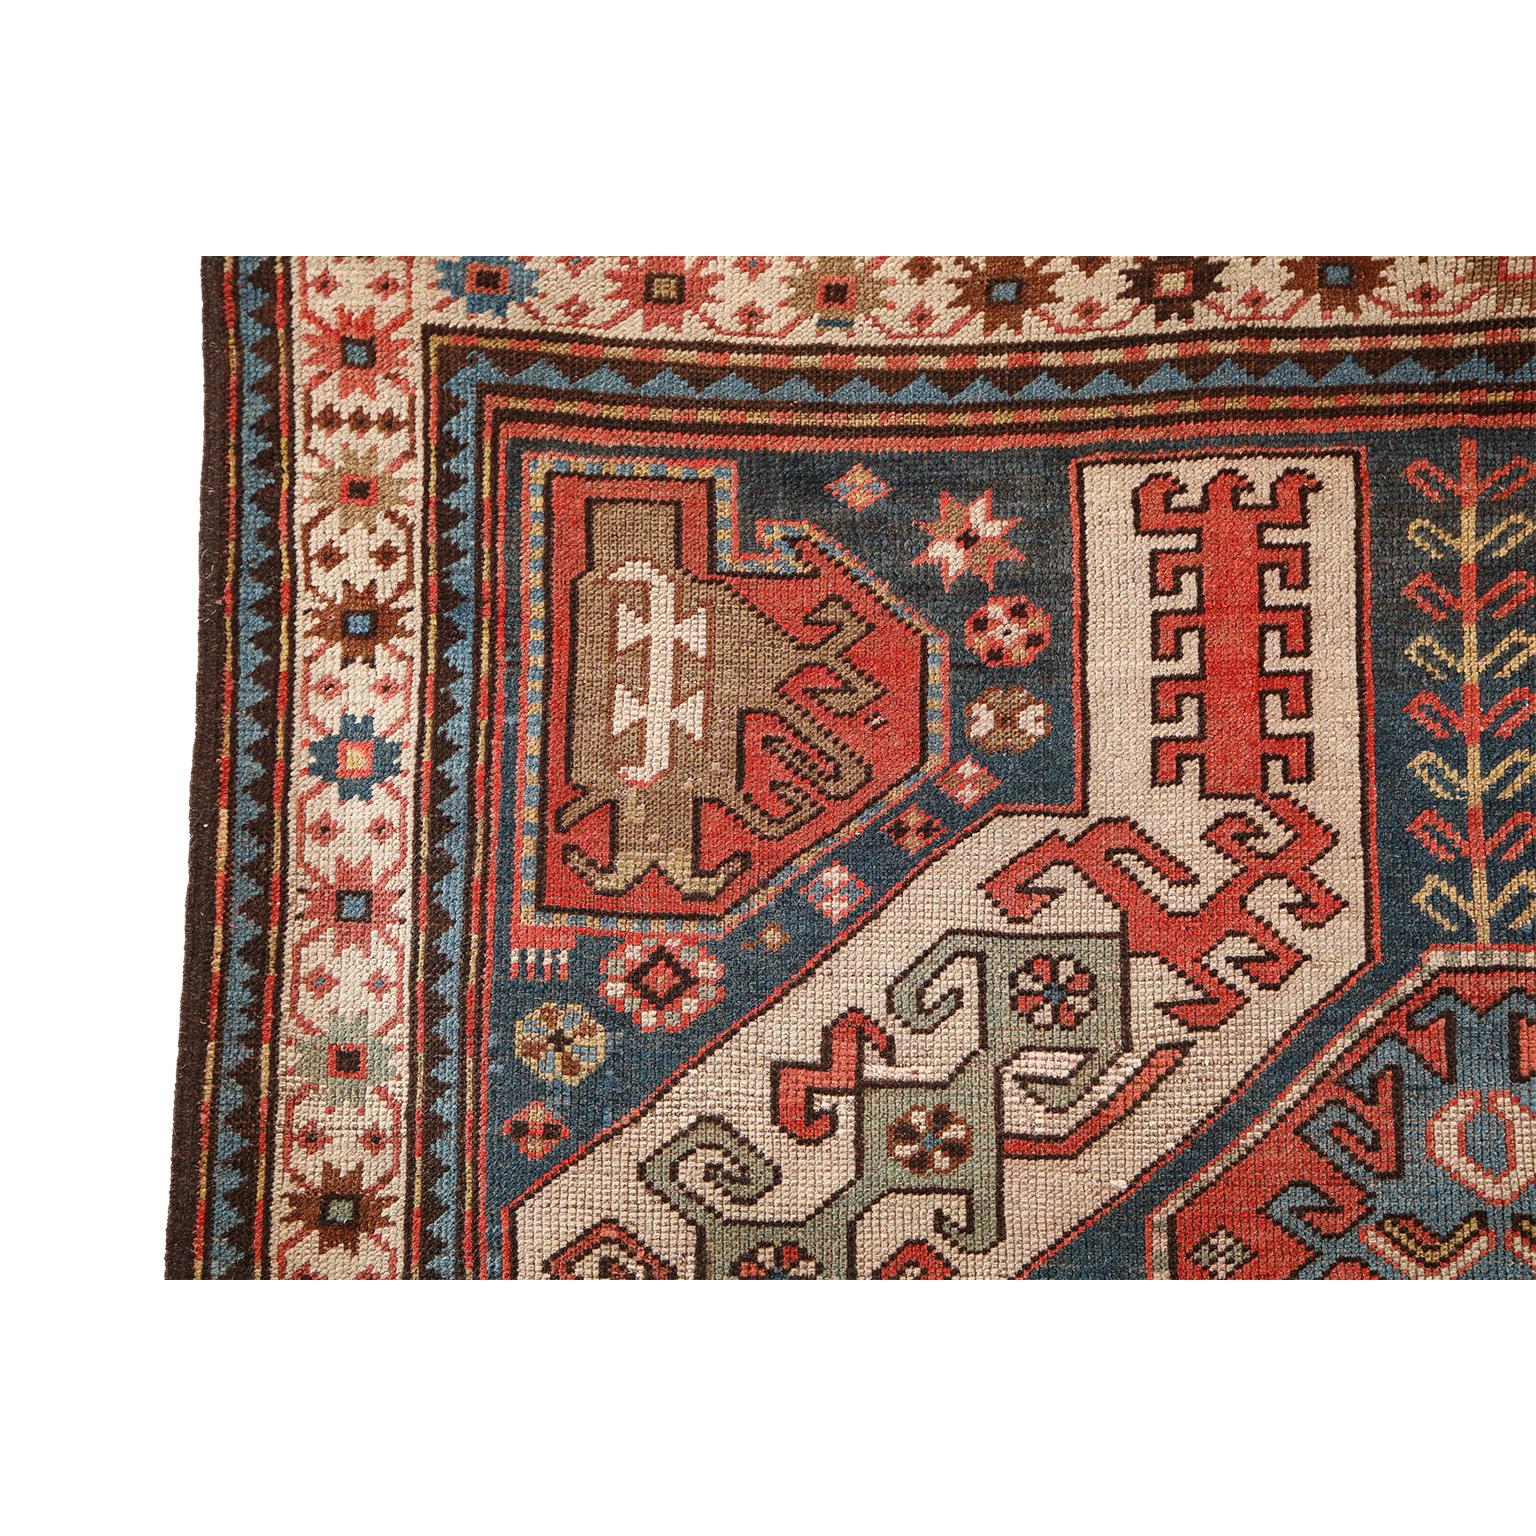 Antique 1880s Caucasian Rug, Wool, Blue, Green, Red, 4' x 6' For Sale 3